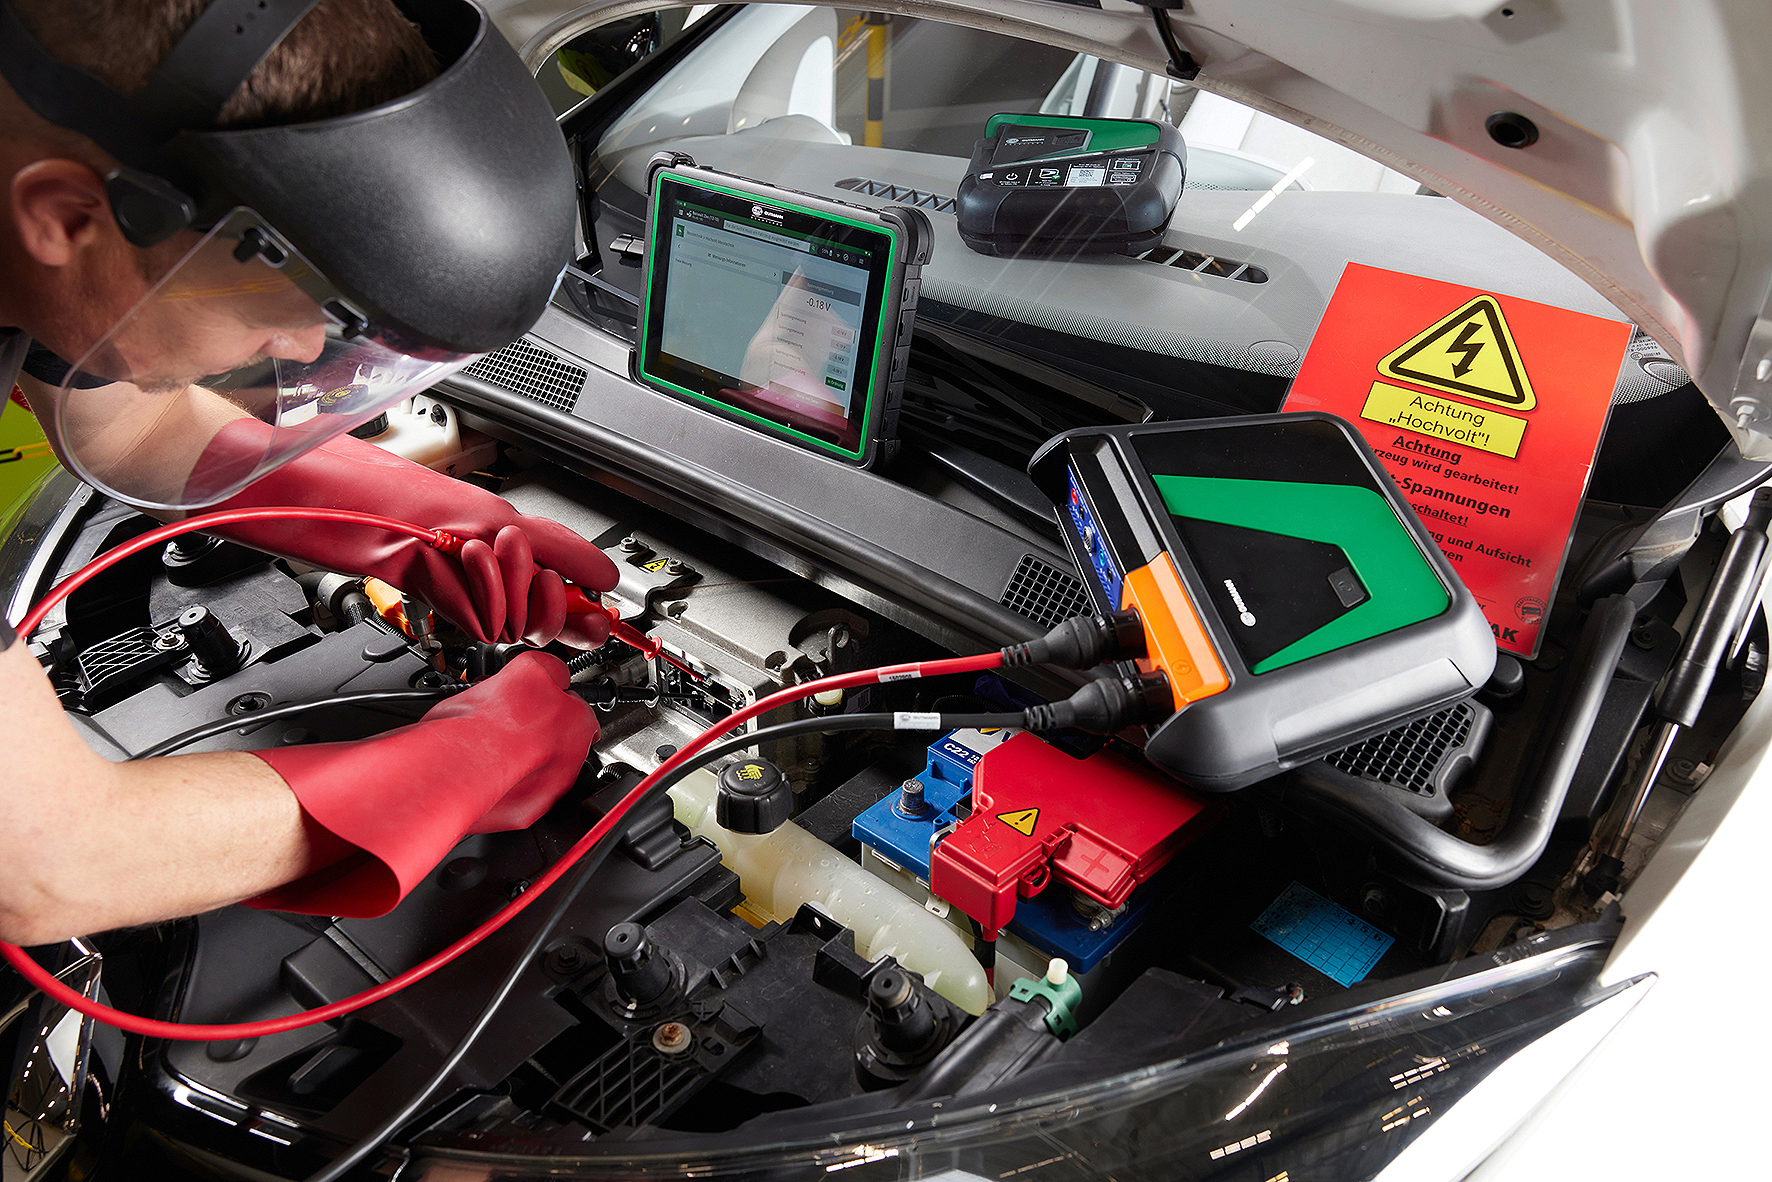 High-voltage and low-voltage measurements with the mega macs X diagnostic device